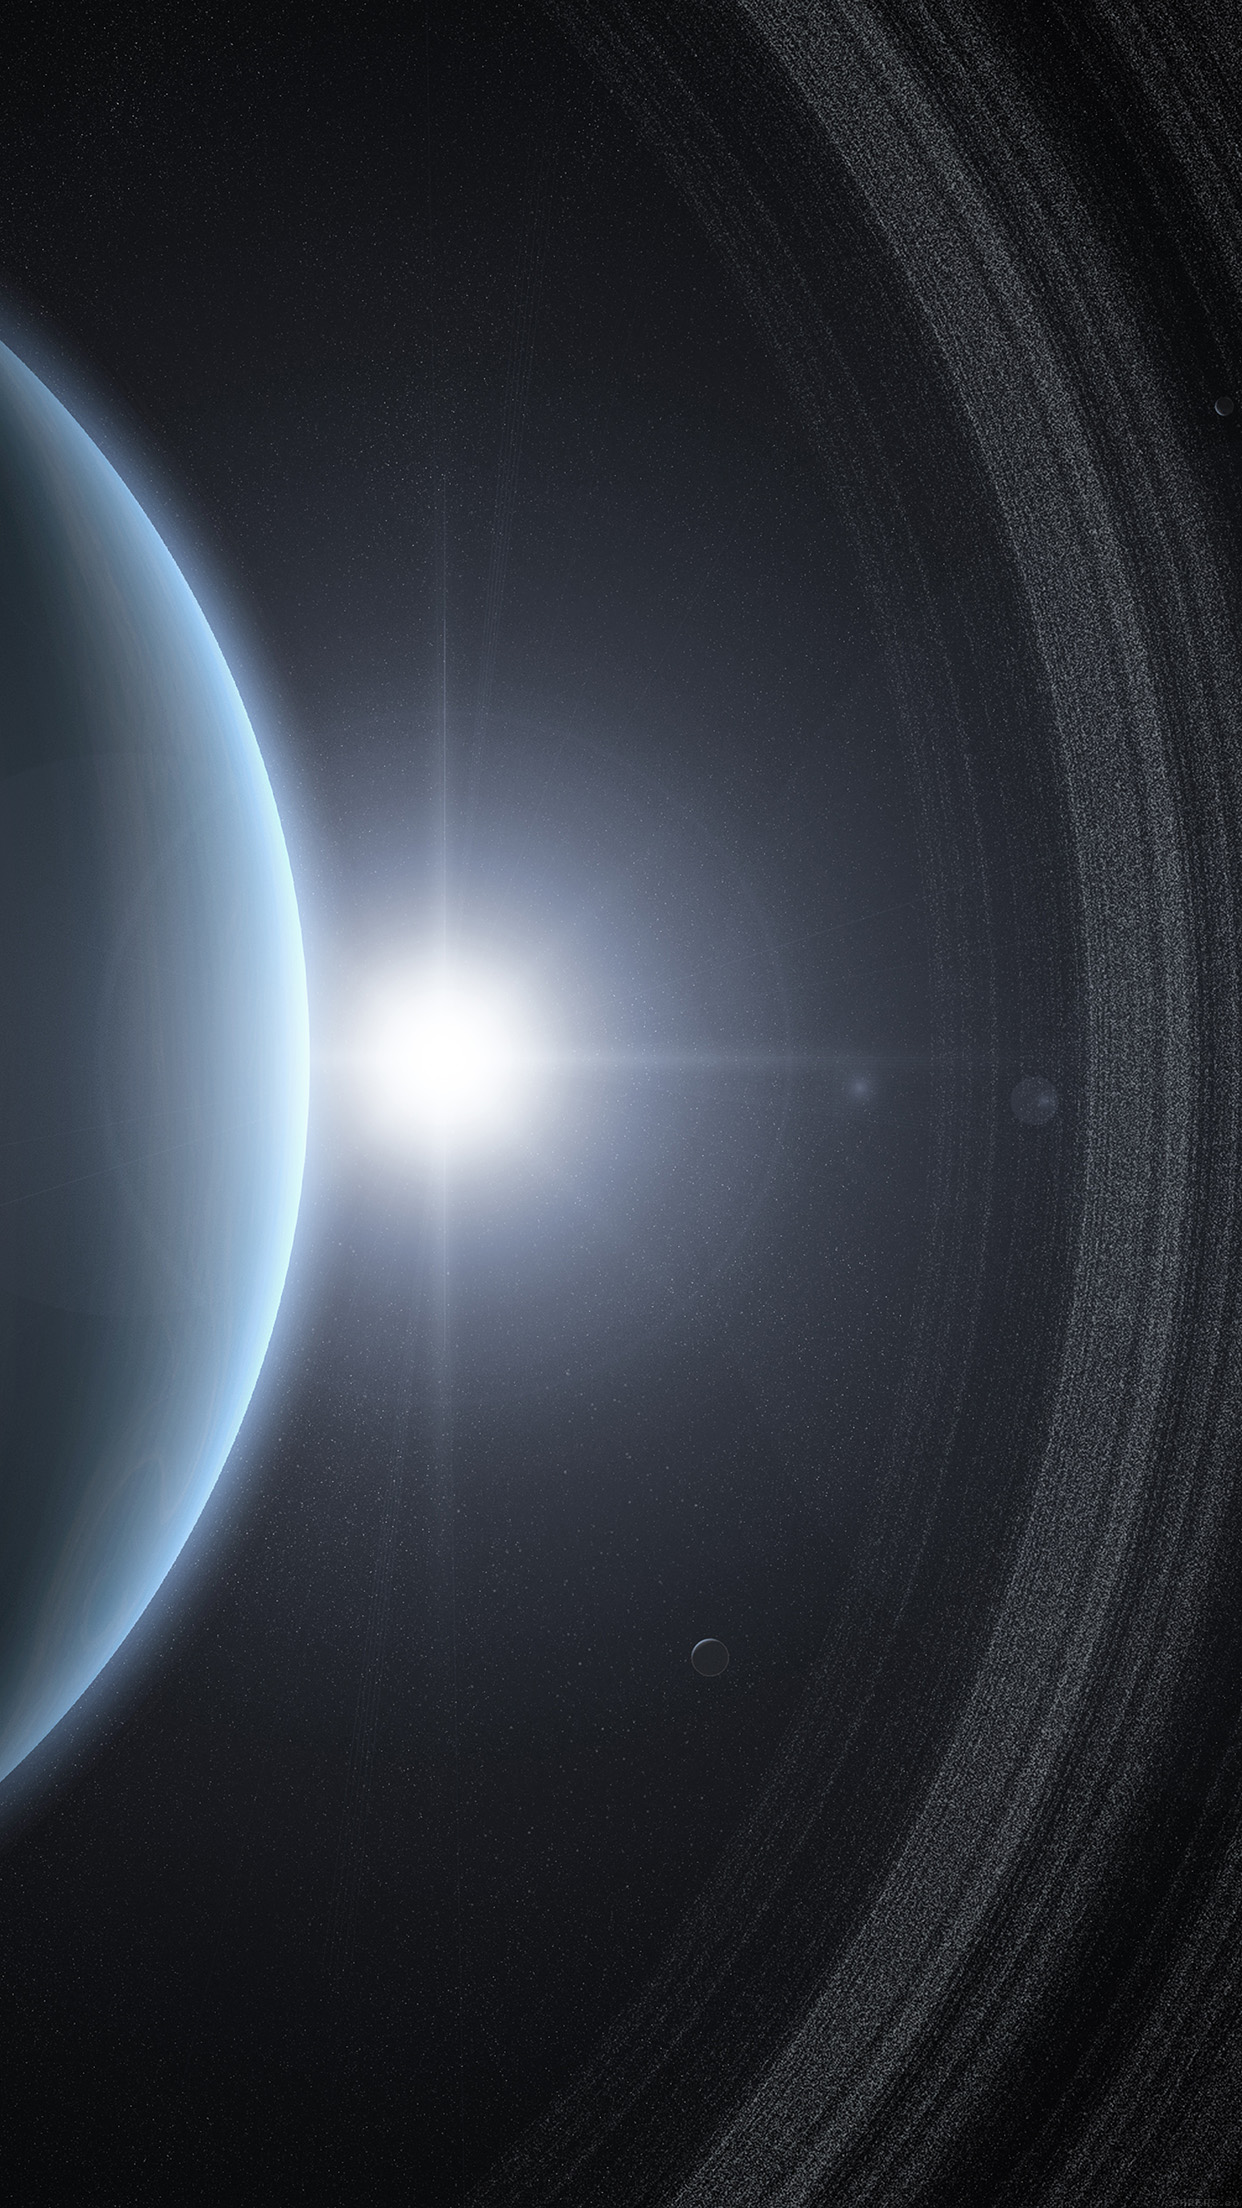 Space Planet Interstellar Light Android Wallpaper - Interstellar Wallpaper For Phone Full Hd - HD Wallpaper 